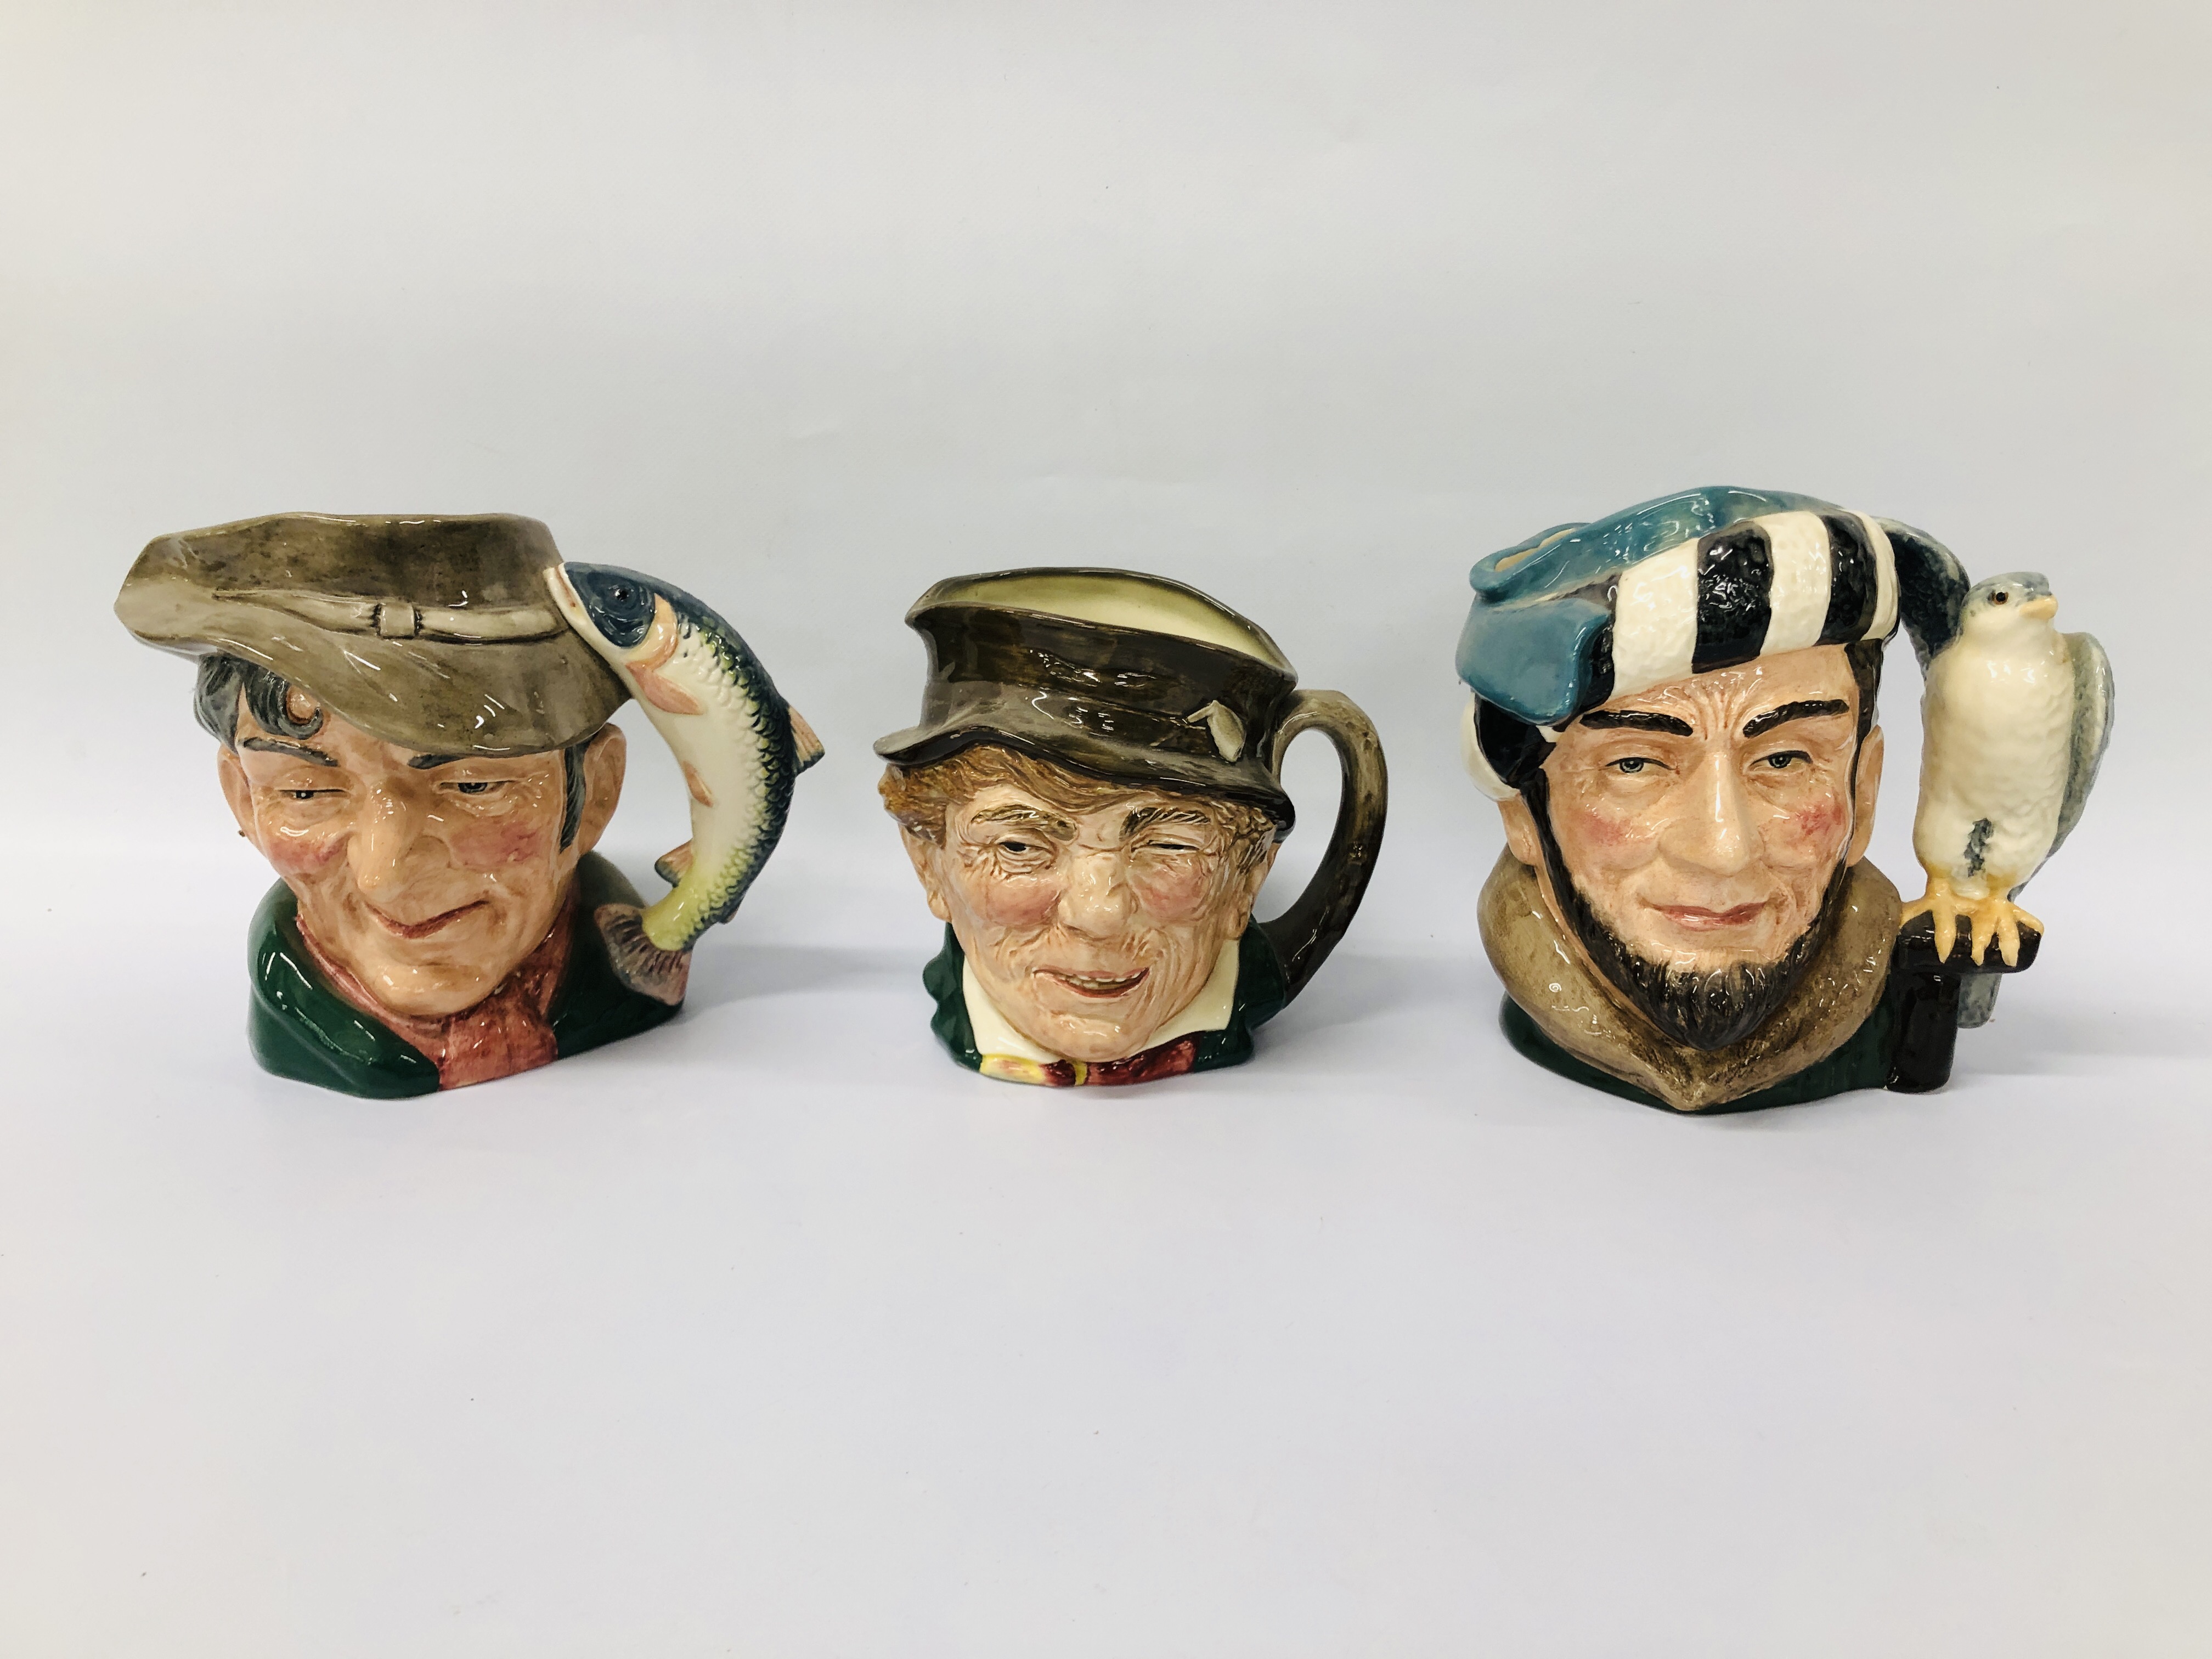 3 X ROYAL DOULTON CHARACTER JUGS TO INCLUDE "THE POACHER" - D 6429, THE FALCONER D 6533,